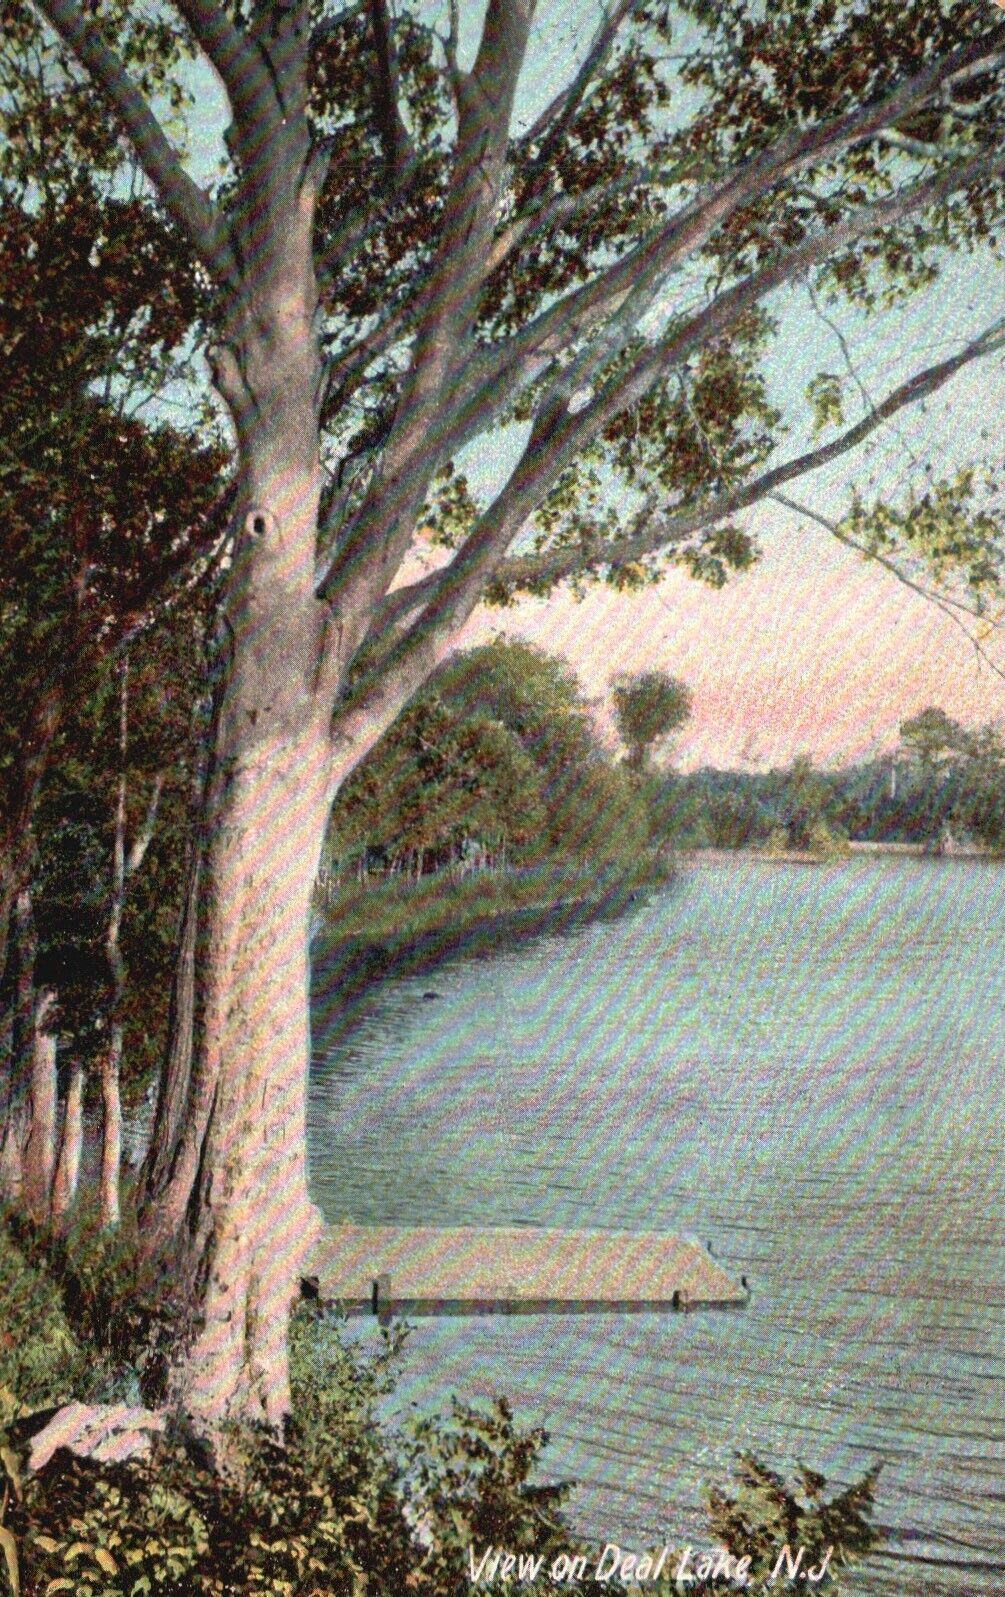 View on Deal Lake, New Jersey, NJ, Unused Antique Vintage Postcard e7350